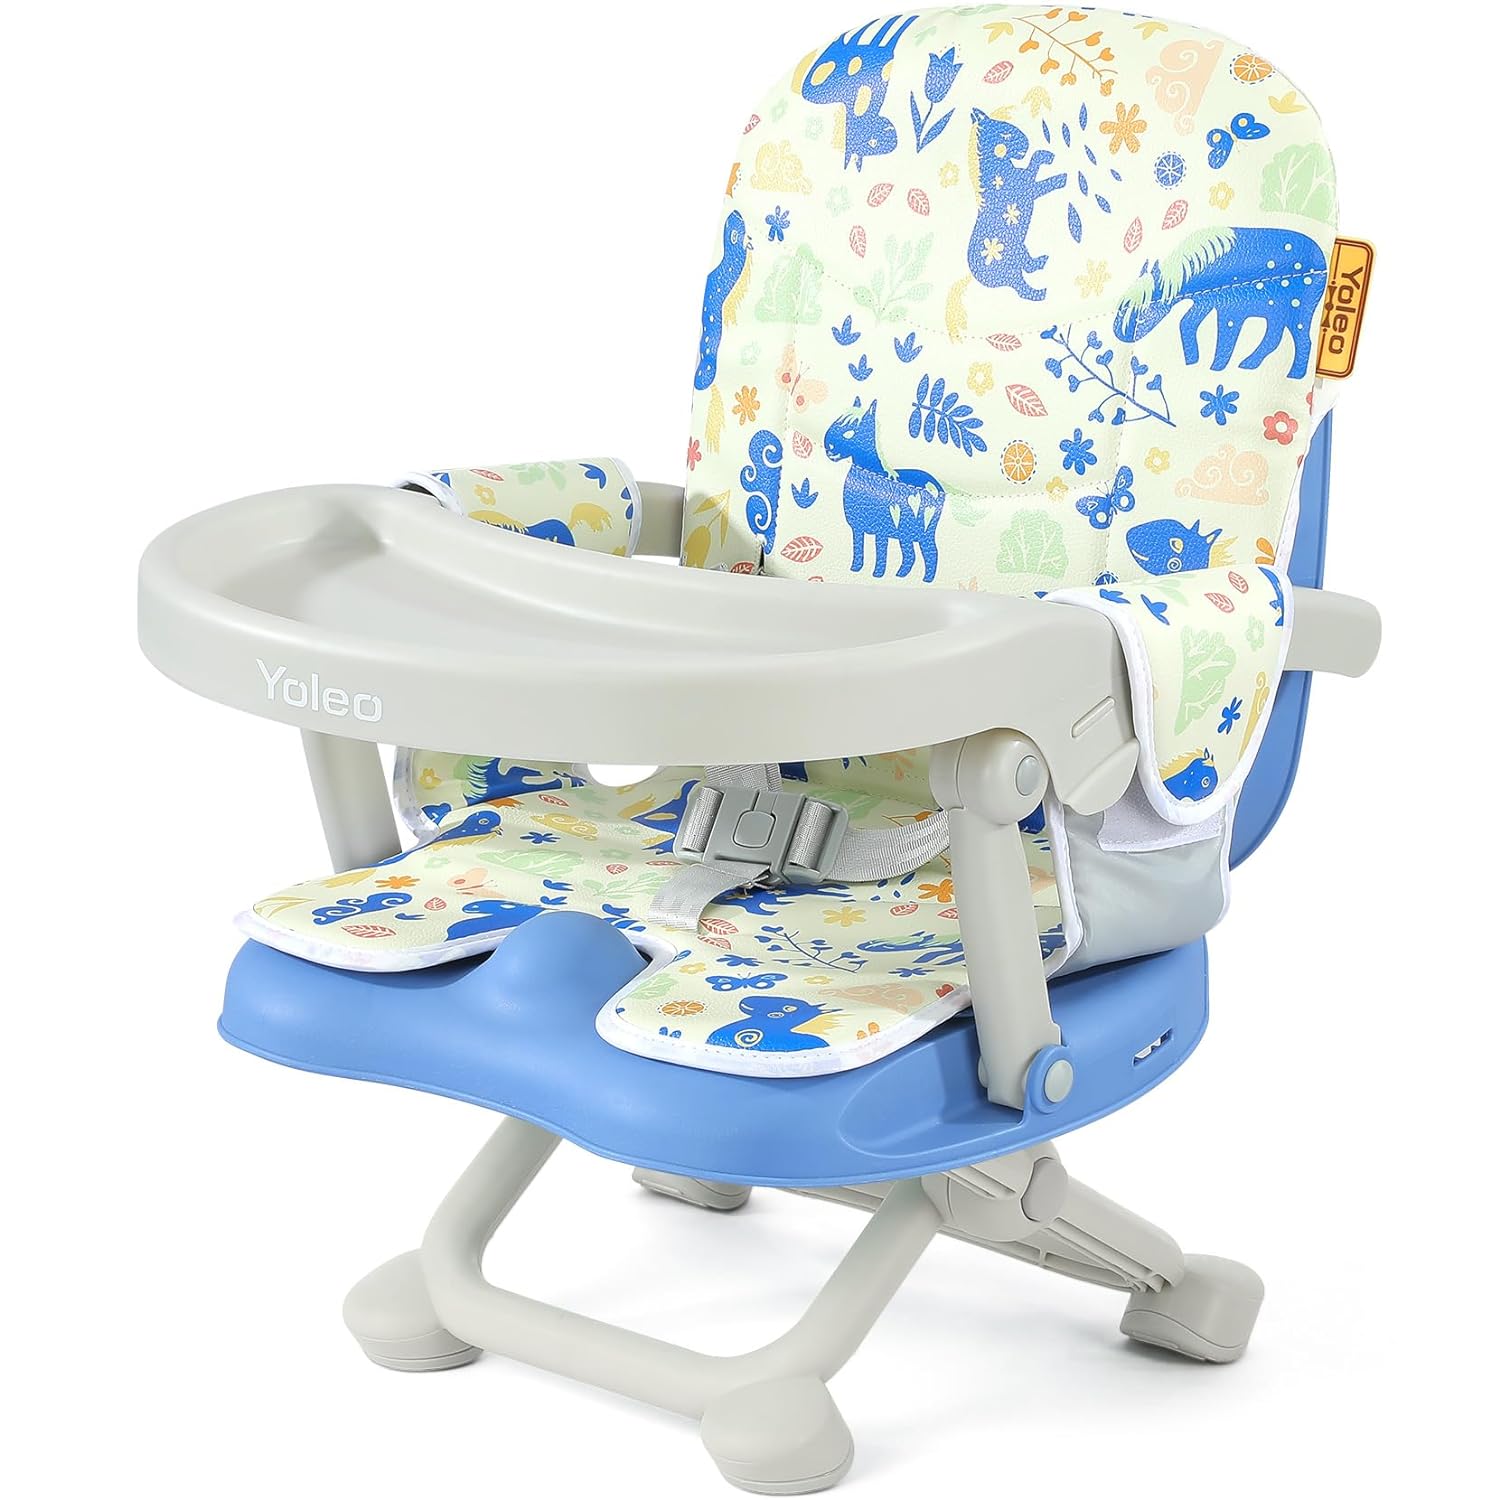 https://bigbigmart.com/wp-content/uploads/2023/10/YOLEO-Baby-High-Chair-Booster-Seat-for-Dining-Table-Adjustable-Height-Travel-Booster-Seat-with-Tray-Toddler-Booster-Seat-Easy-Clean.jpg